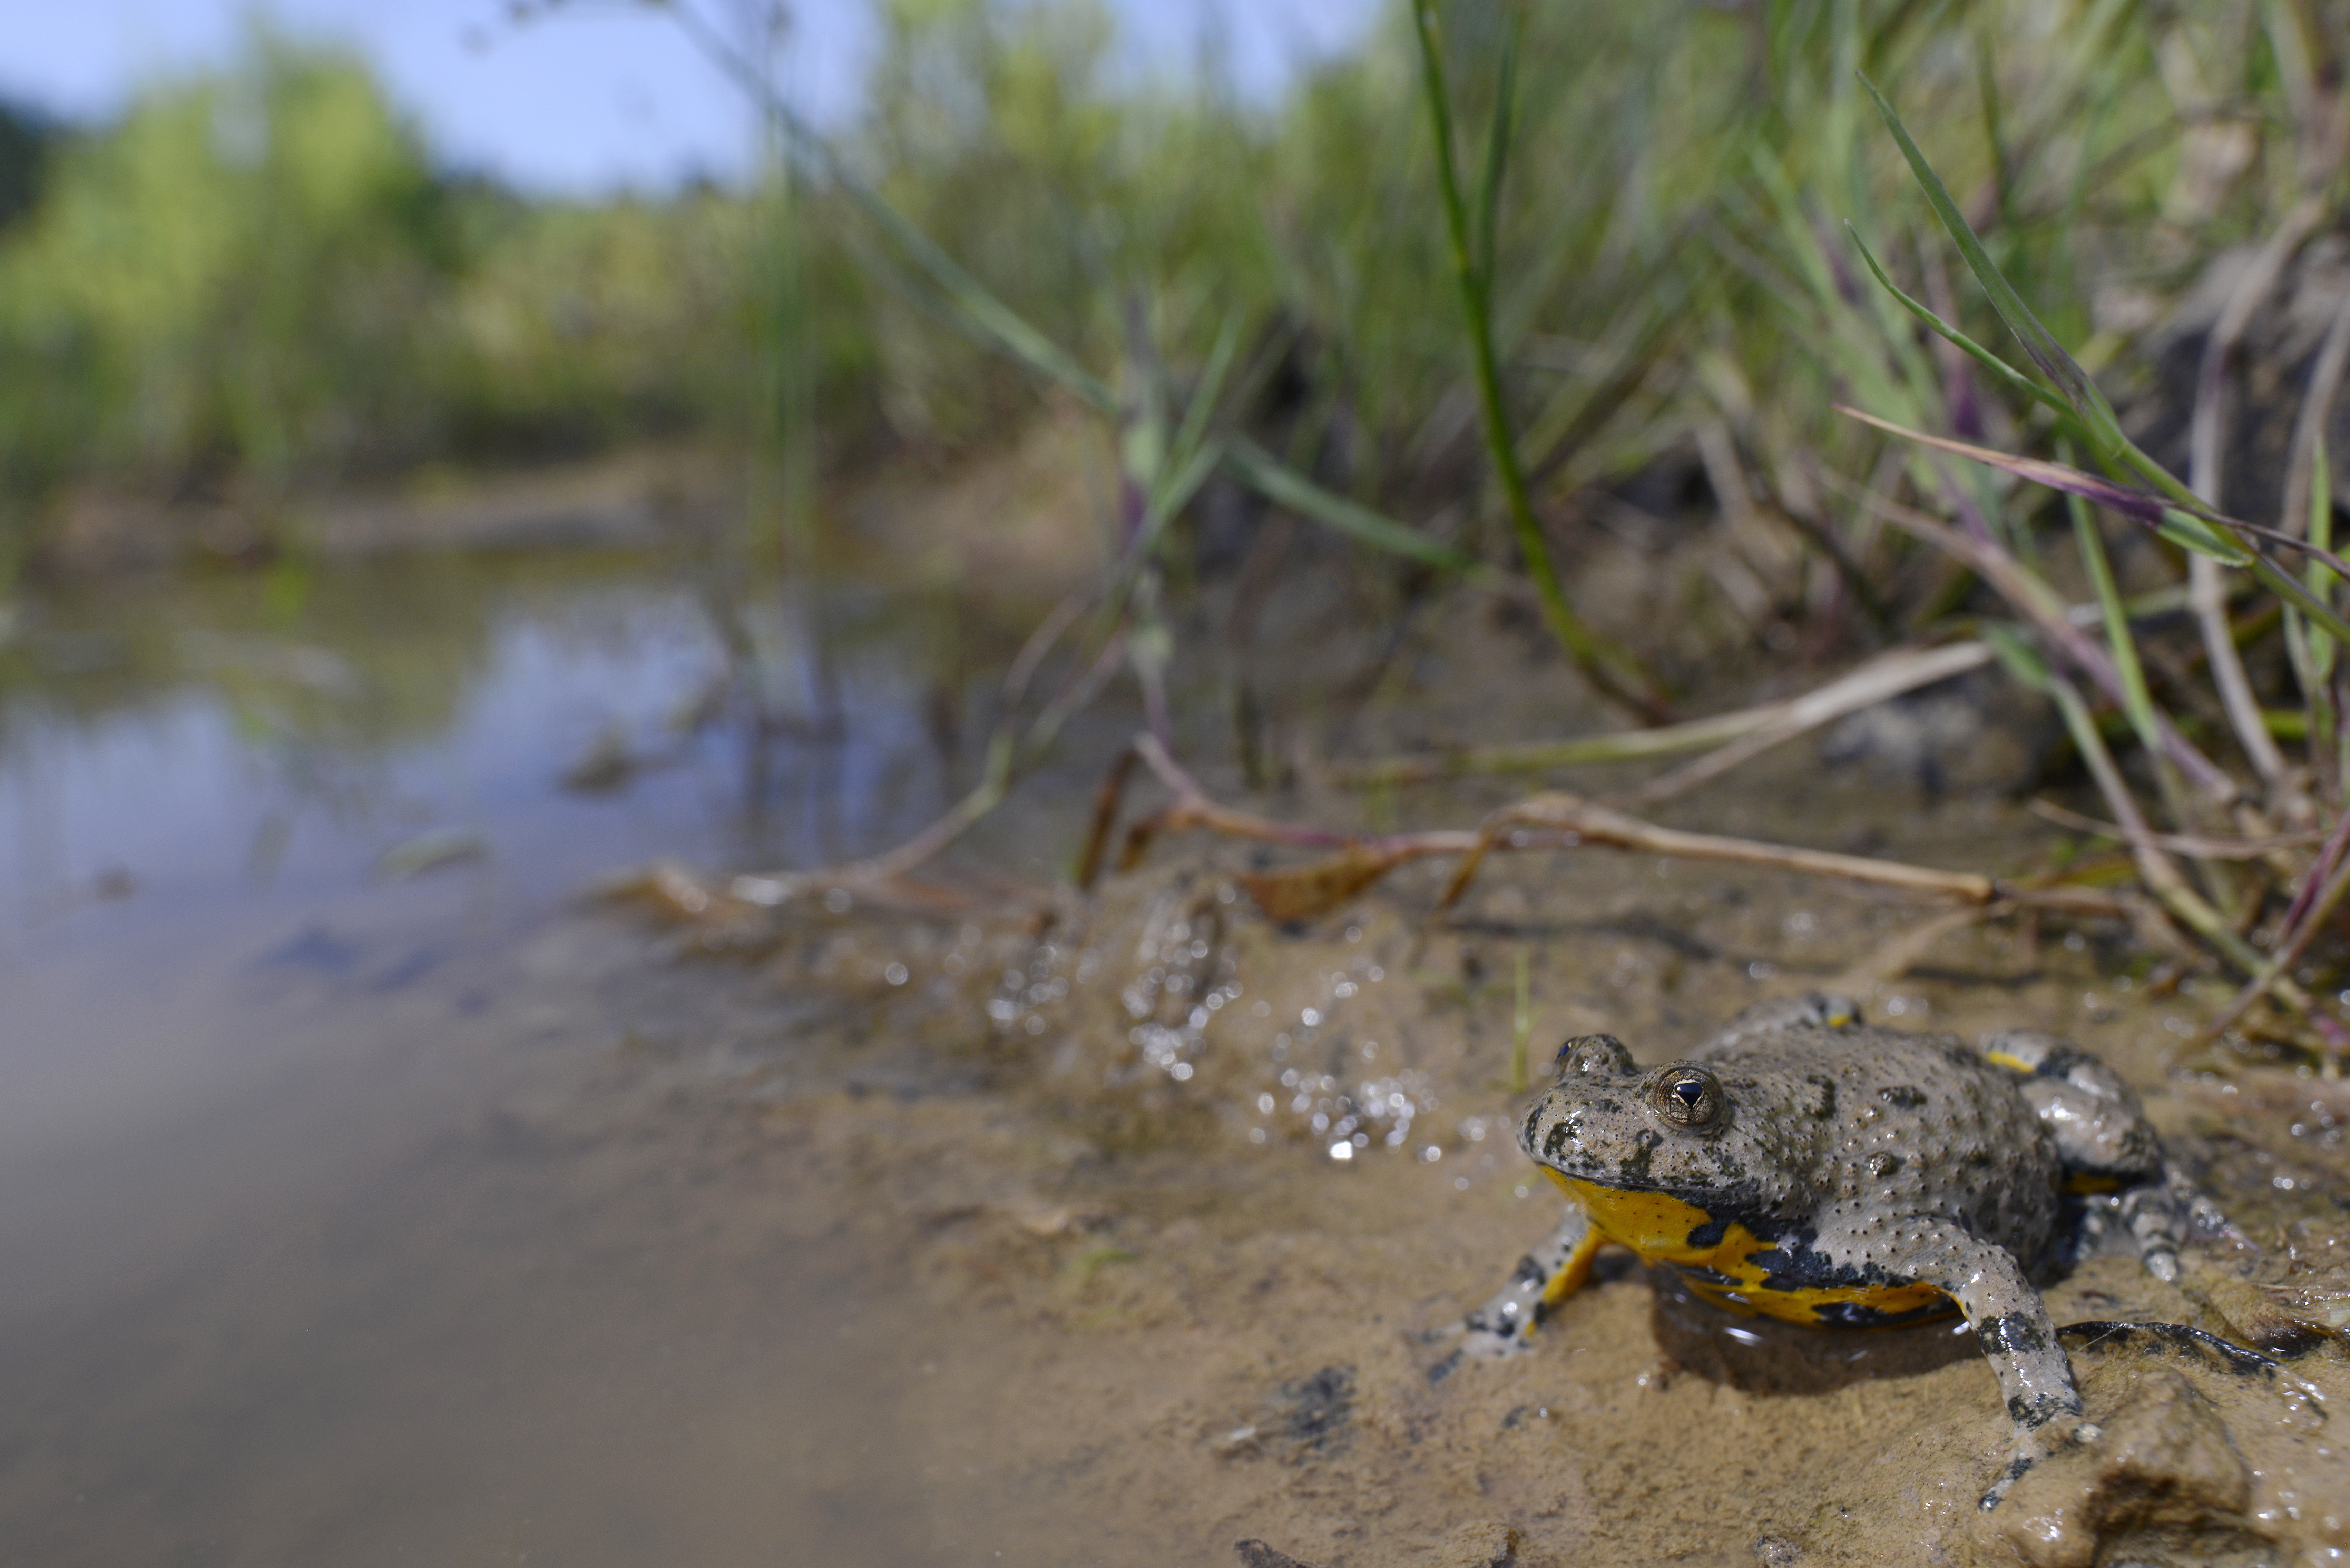 As a pioneer species, yellow-bellied toads in Germany primarily inhabit the floodplains of rivers to colonize the shallow water areas that develop after floods. | Benny Trapp